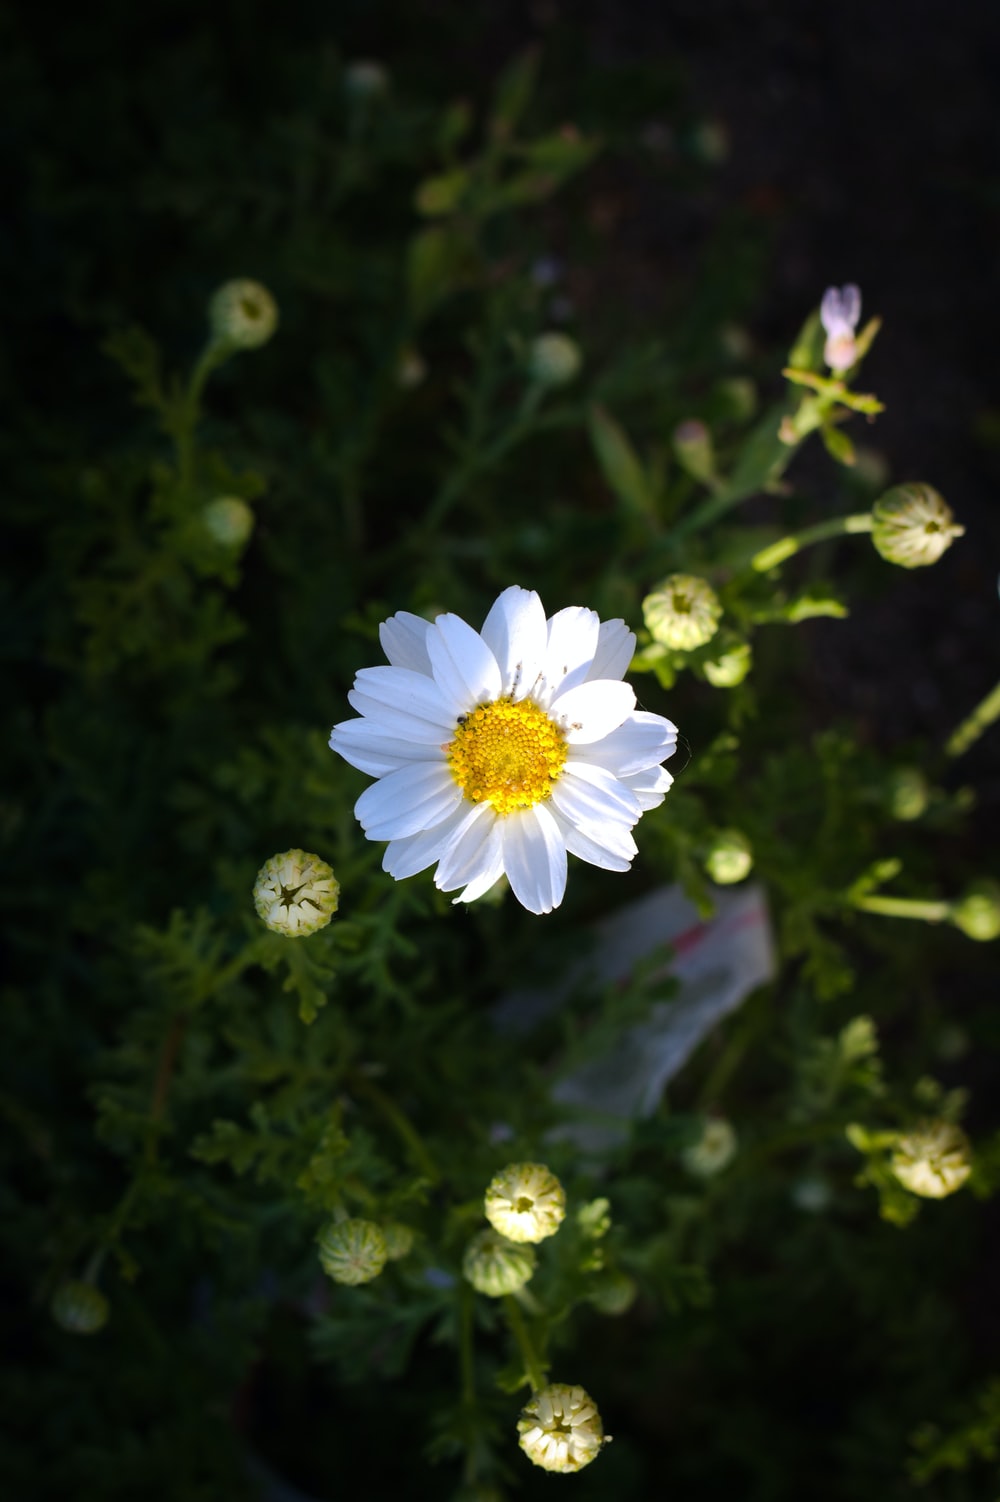 Small Flowers Picture. Download Free Image